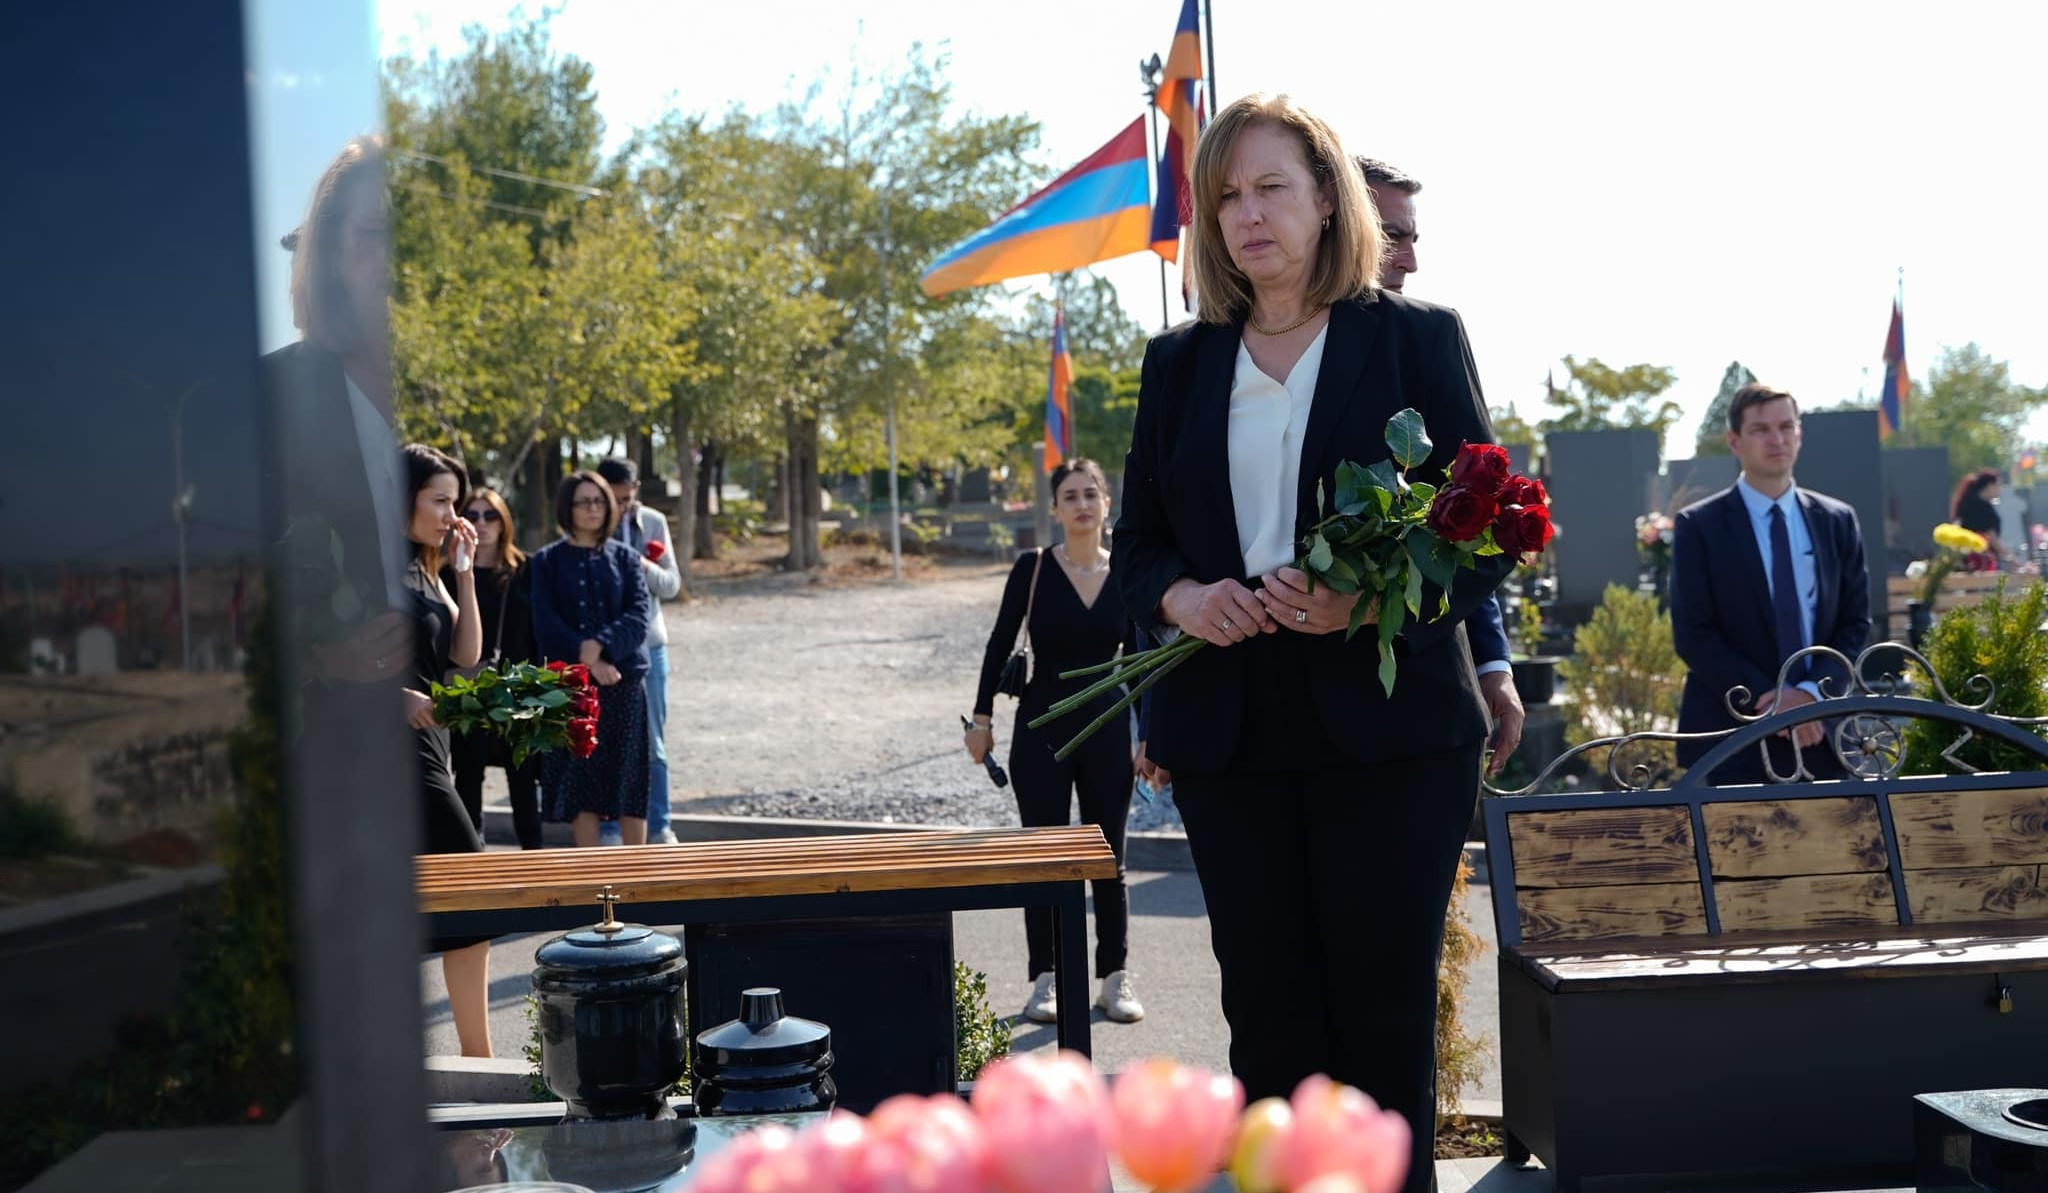 Ambassador Kvien paid tribute to those who lost their lives during conflict